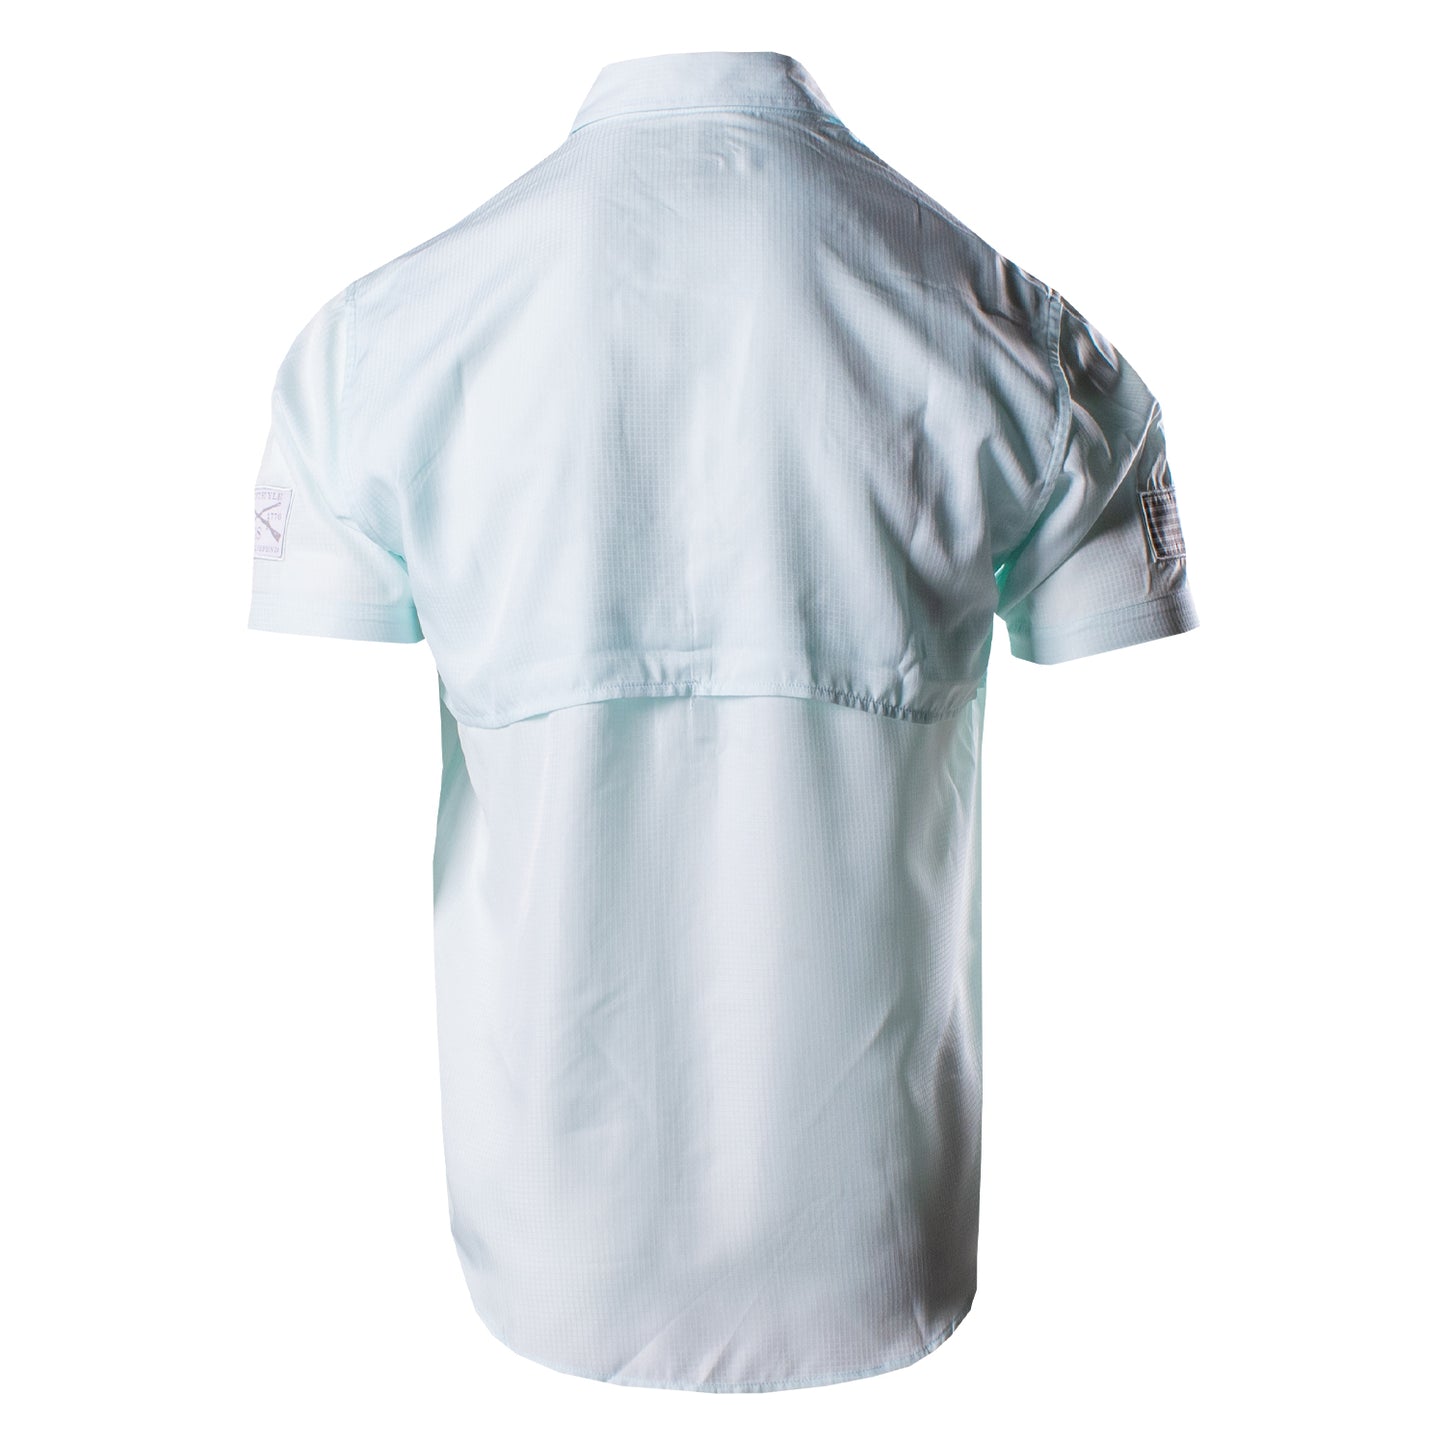 Back of the Grunt Style Short Sleeve Fishing Shirt in Seafoam